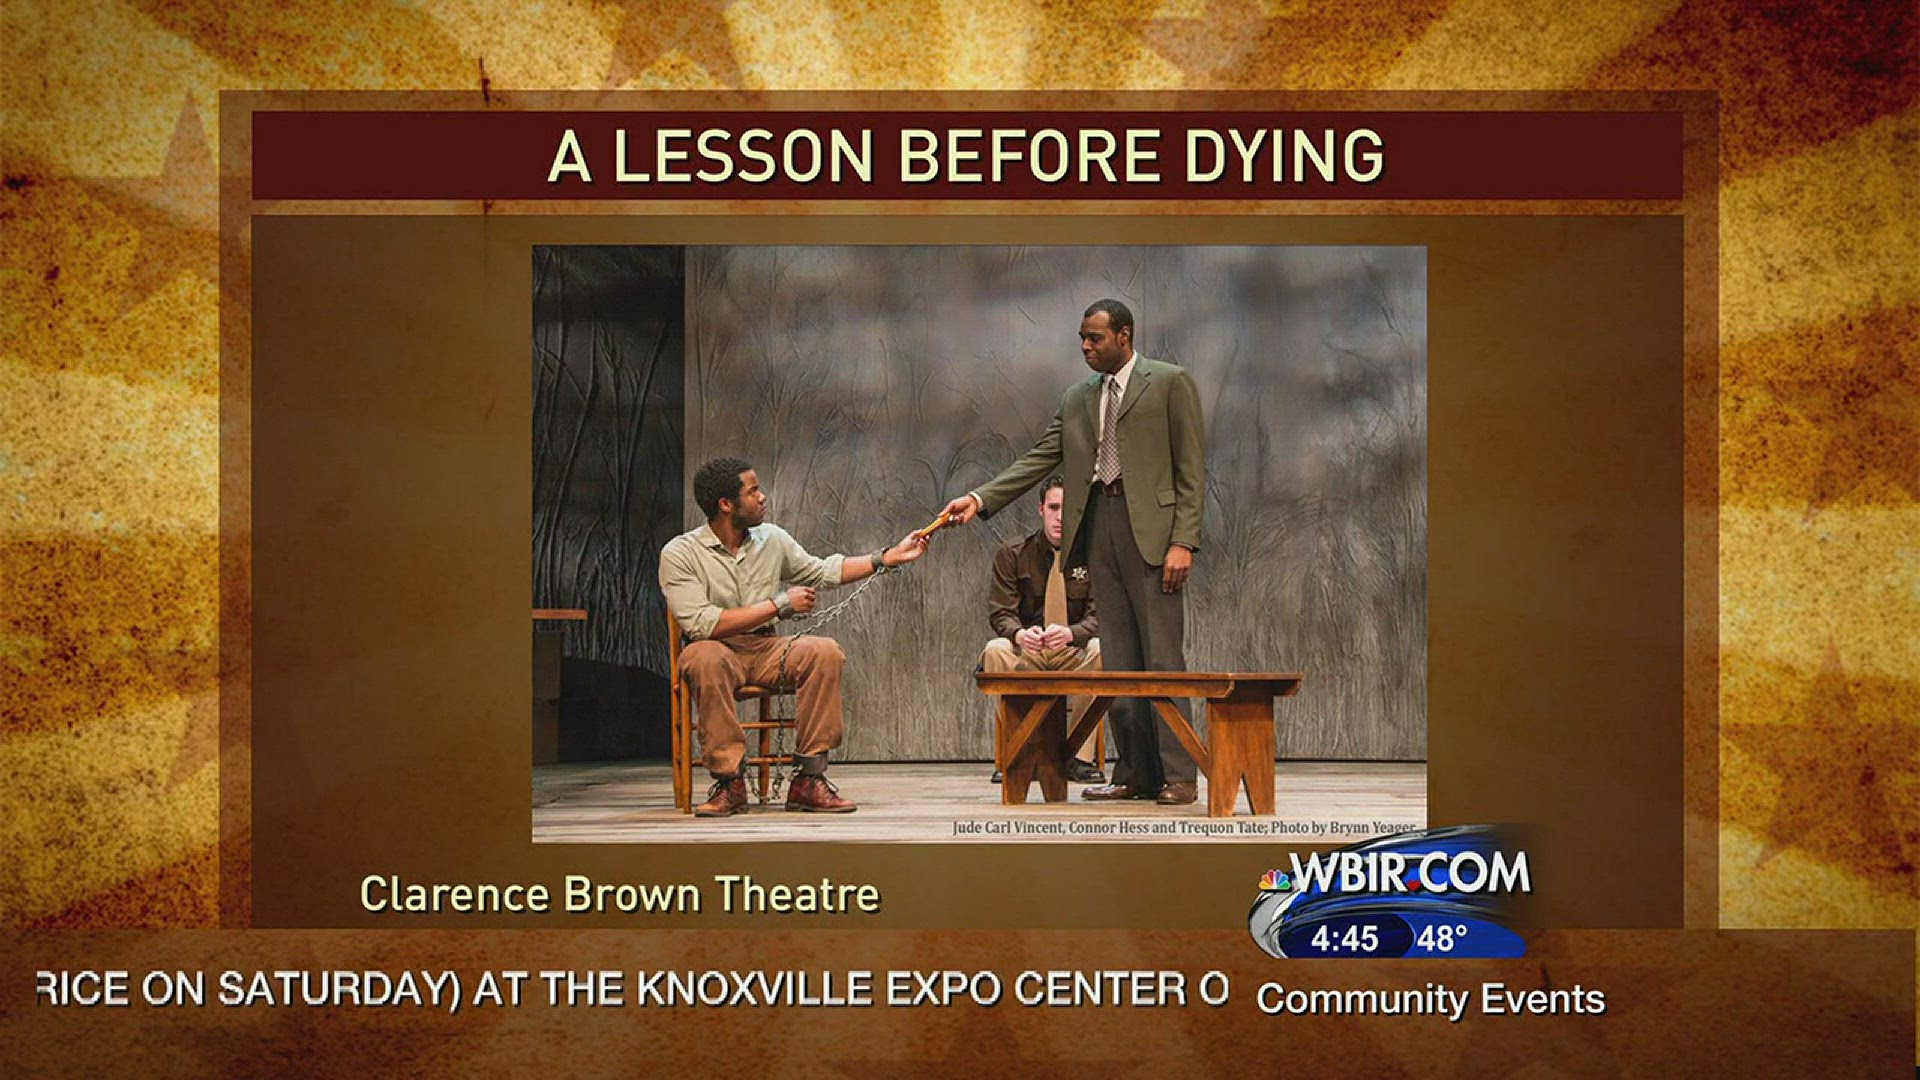 March 4, 2016Live at Five at 4Clarence Brown Theatre's Production of A Lesson Before DyingRuns through March 13http://clarencebrowntheatre.com/